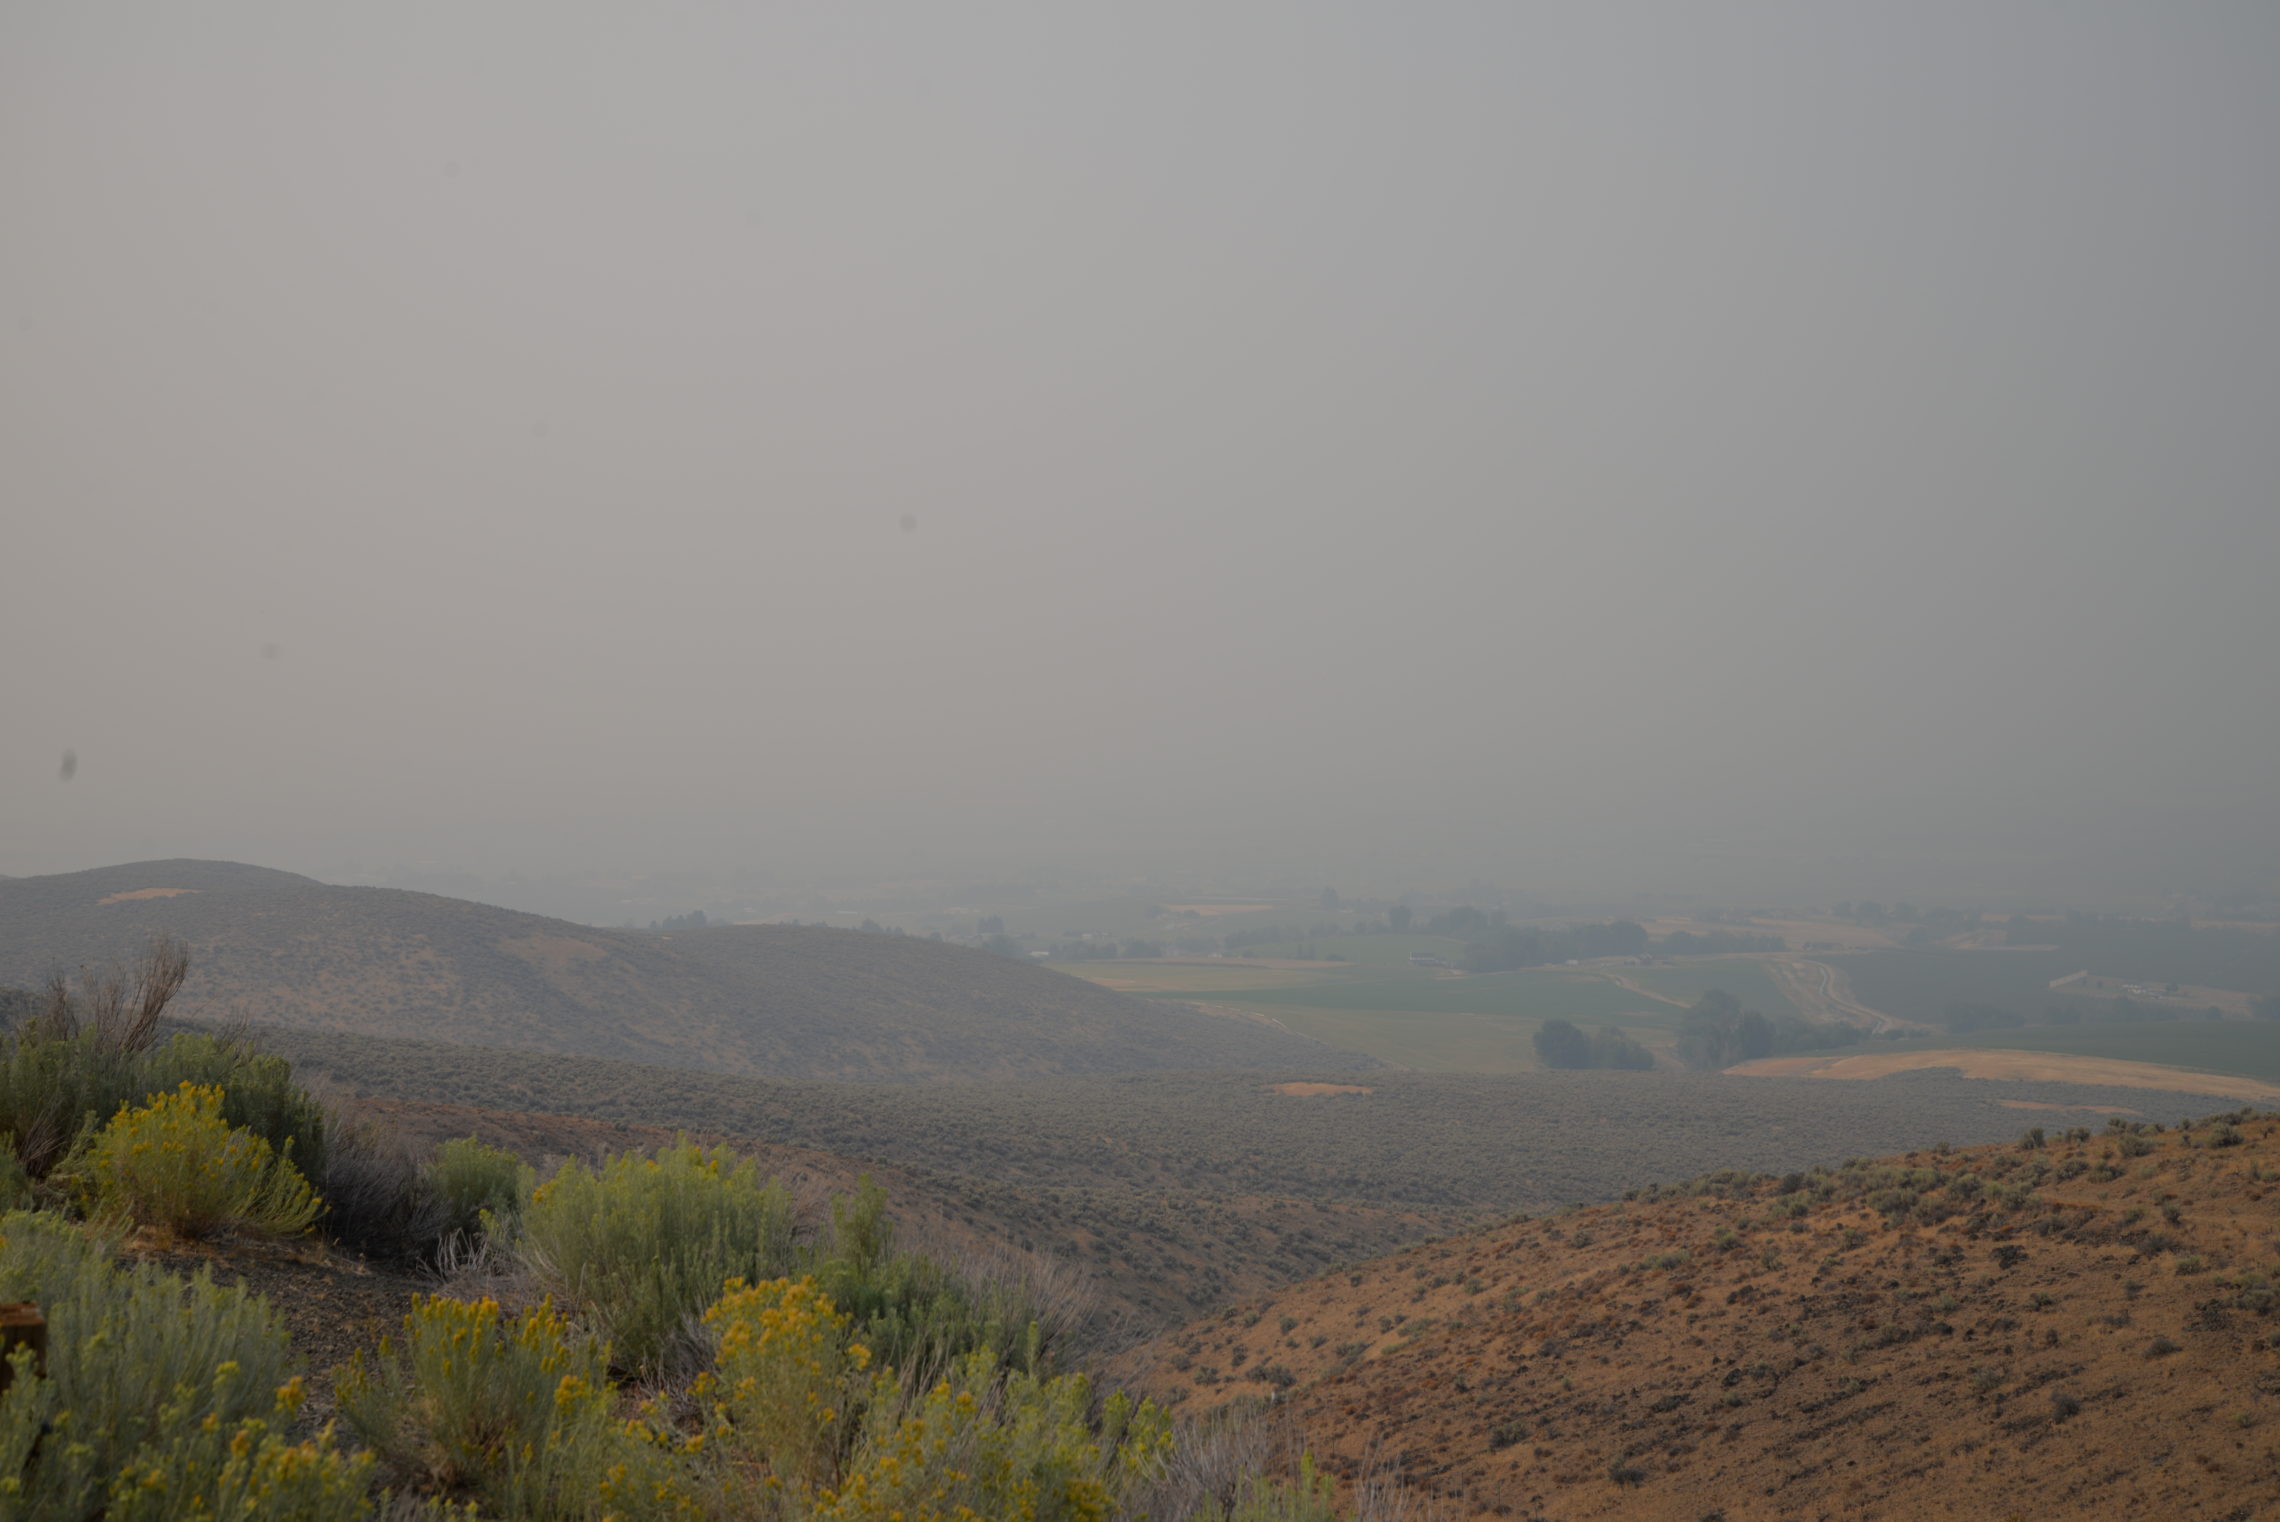 Smoky skies in Central Washington this week have made it hard to see distant mountains, and harder for some farmworkers to breathe clean air. CREDIT: ESMY JIMENEZ/NWPB